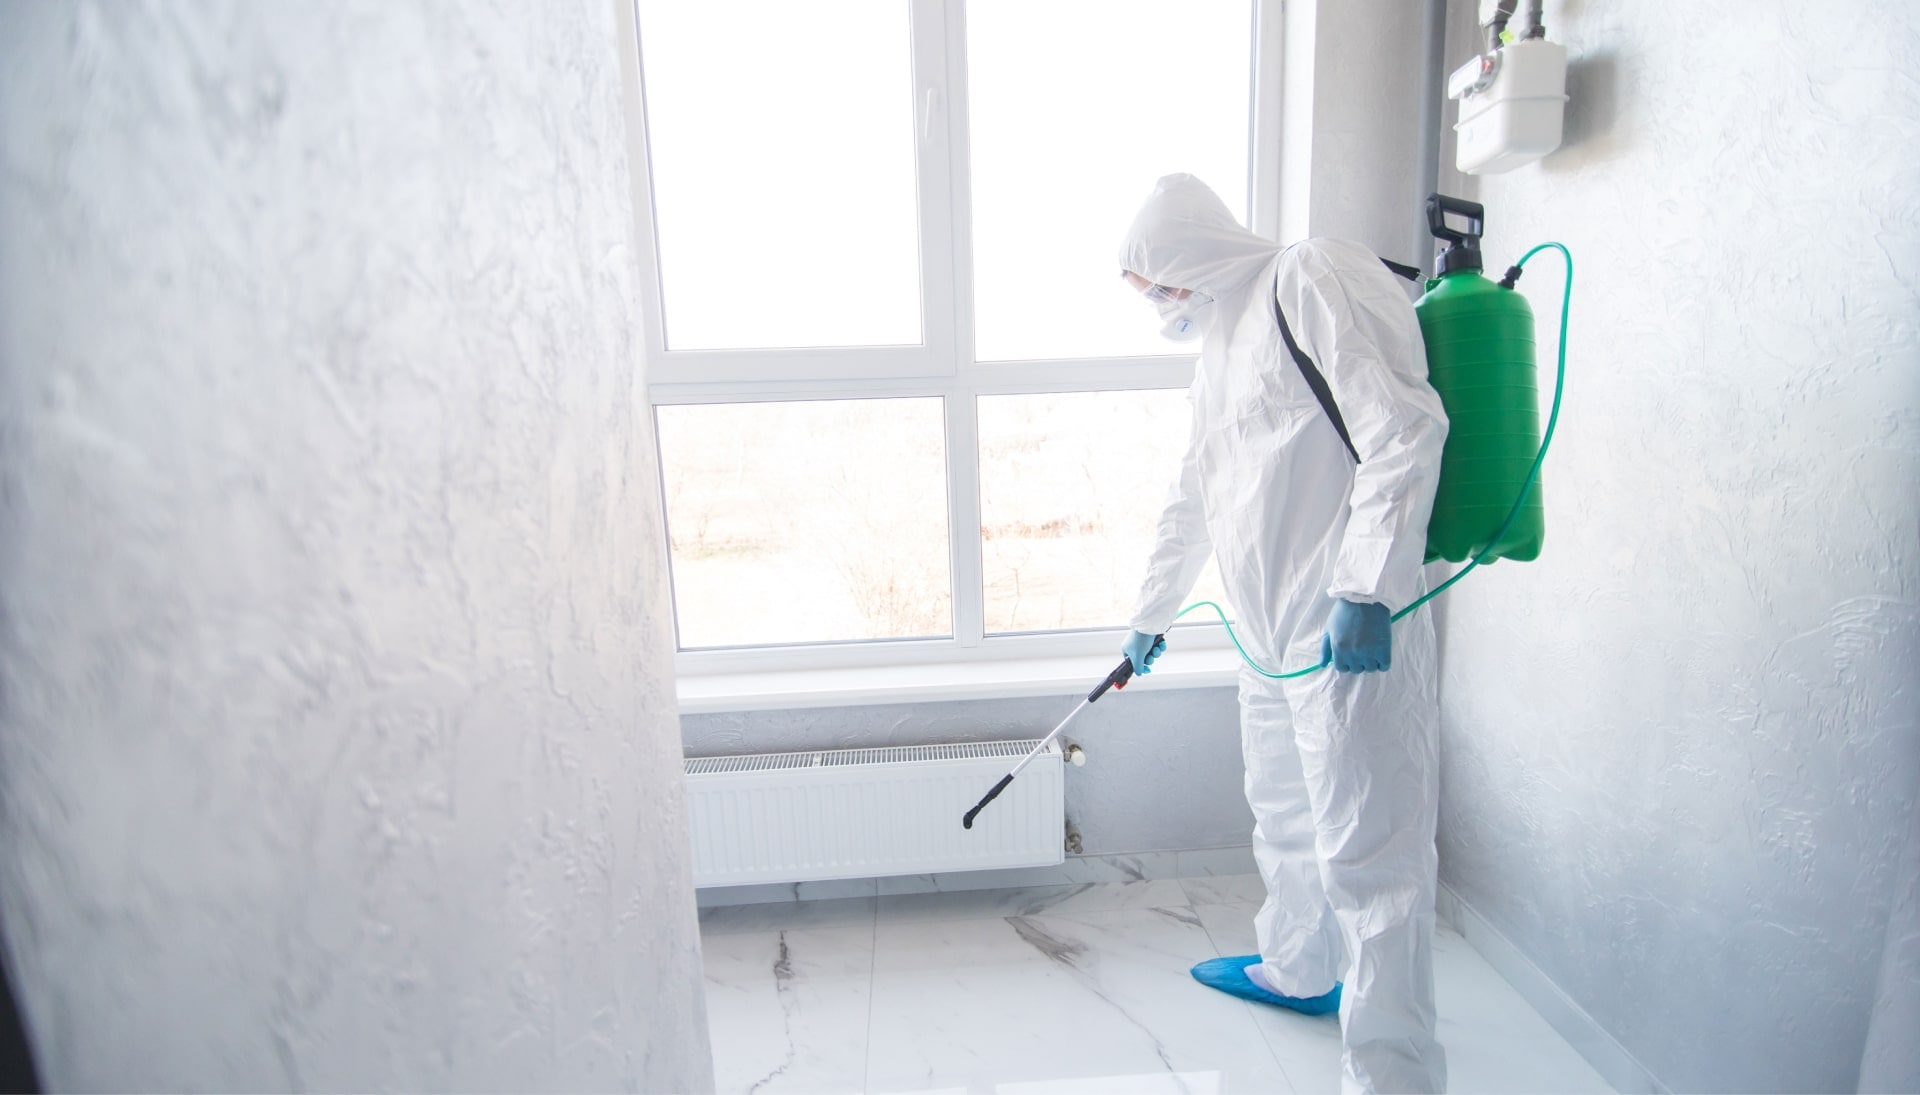 We provide the highest-quality mold inspection, testing, and removal services in the Des Moines, Iowa area.